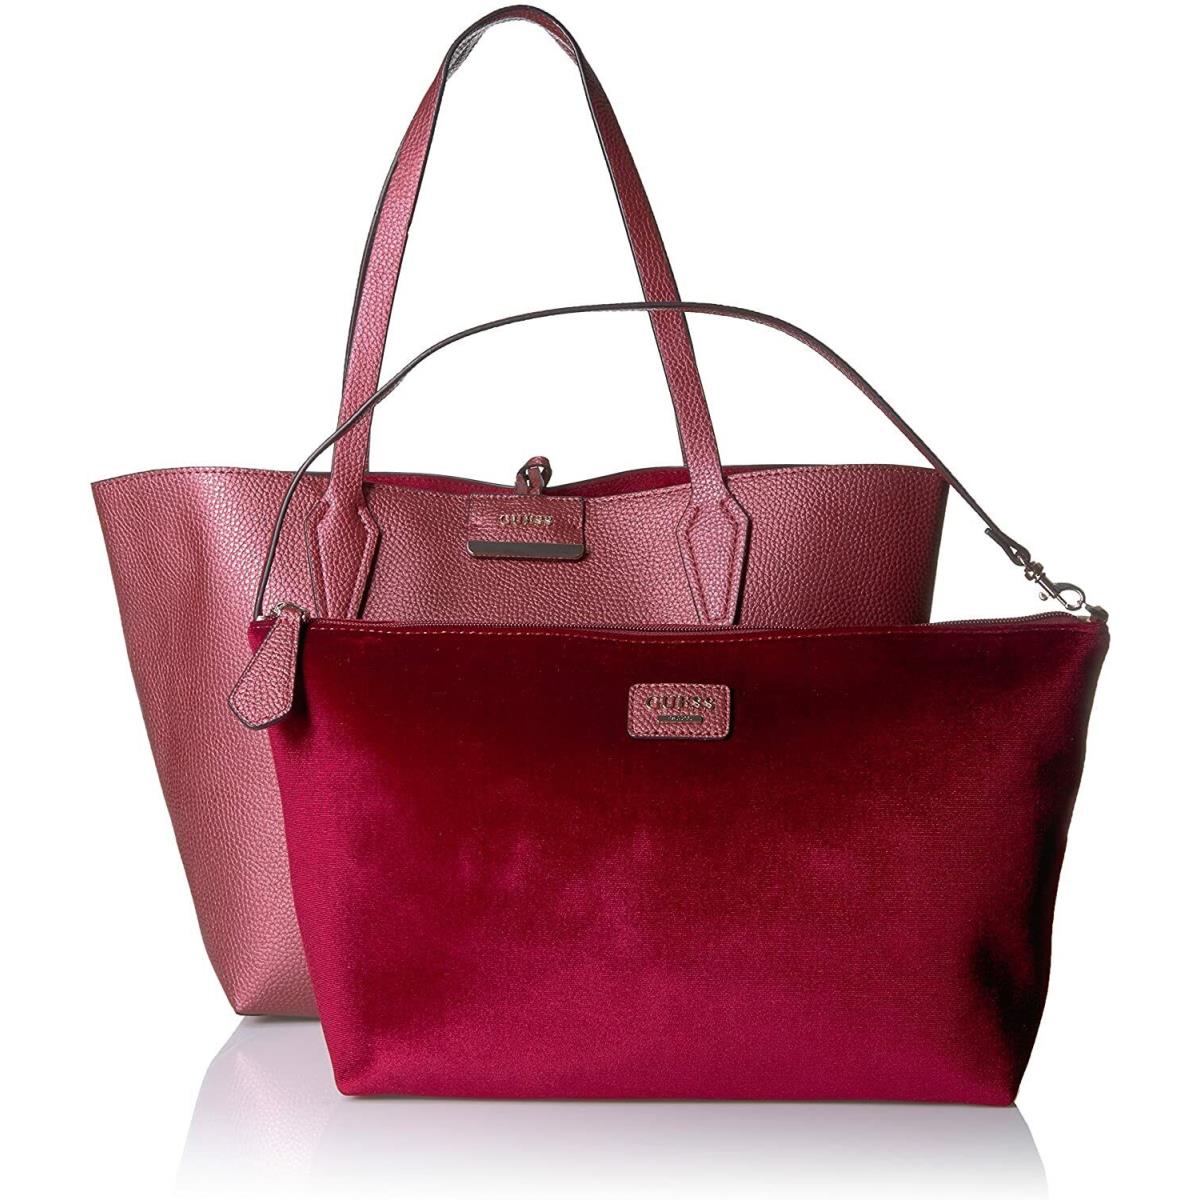 Guess Bobbi 2-in-1 Reversible Red Pink Velvet Tote Handbag Removable Pouch